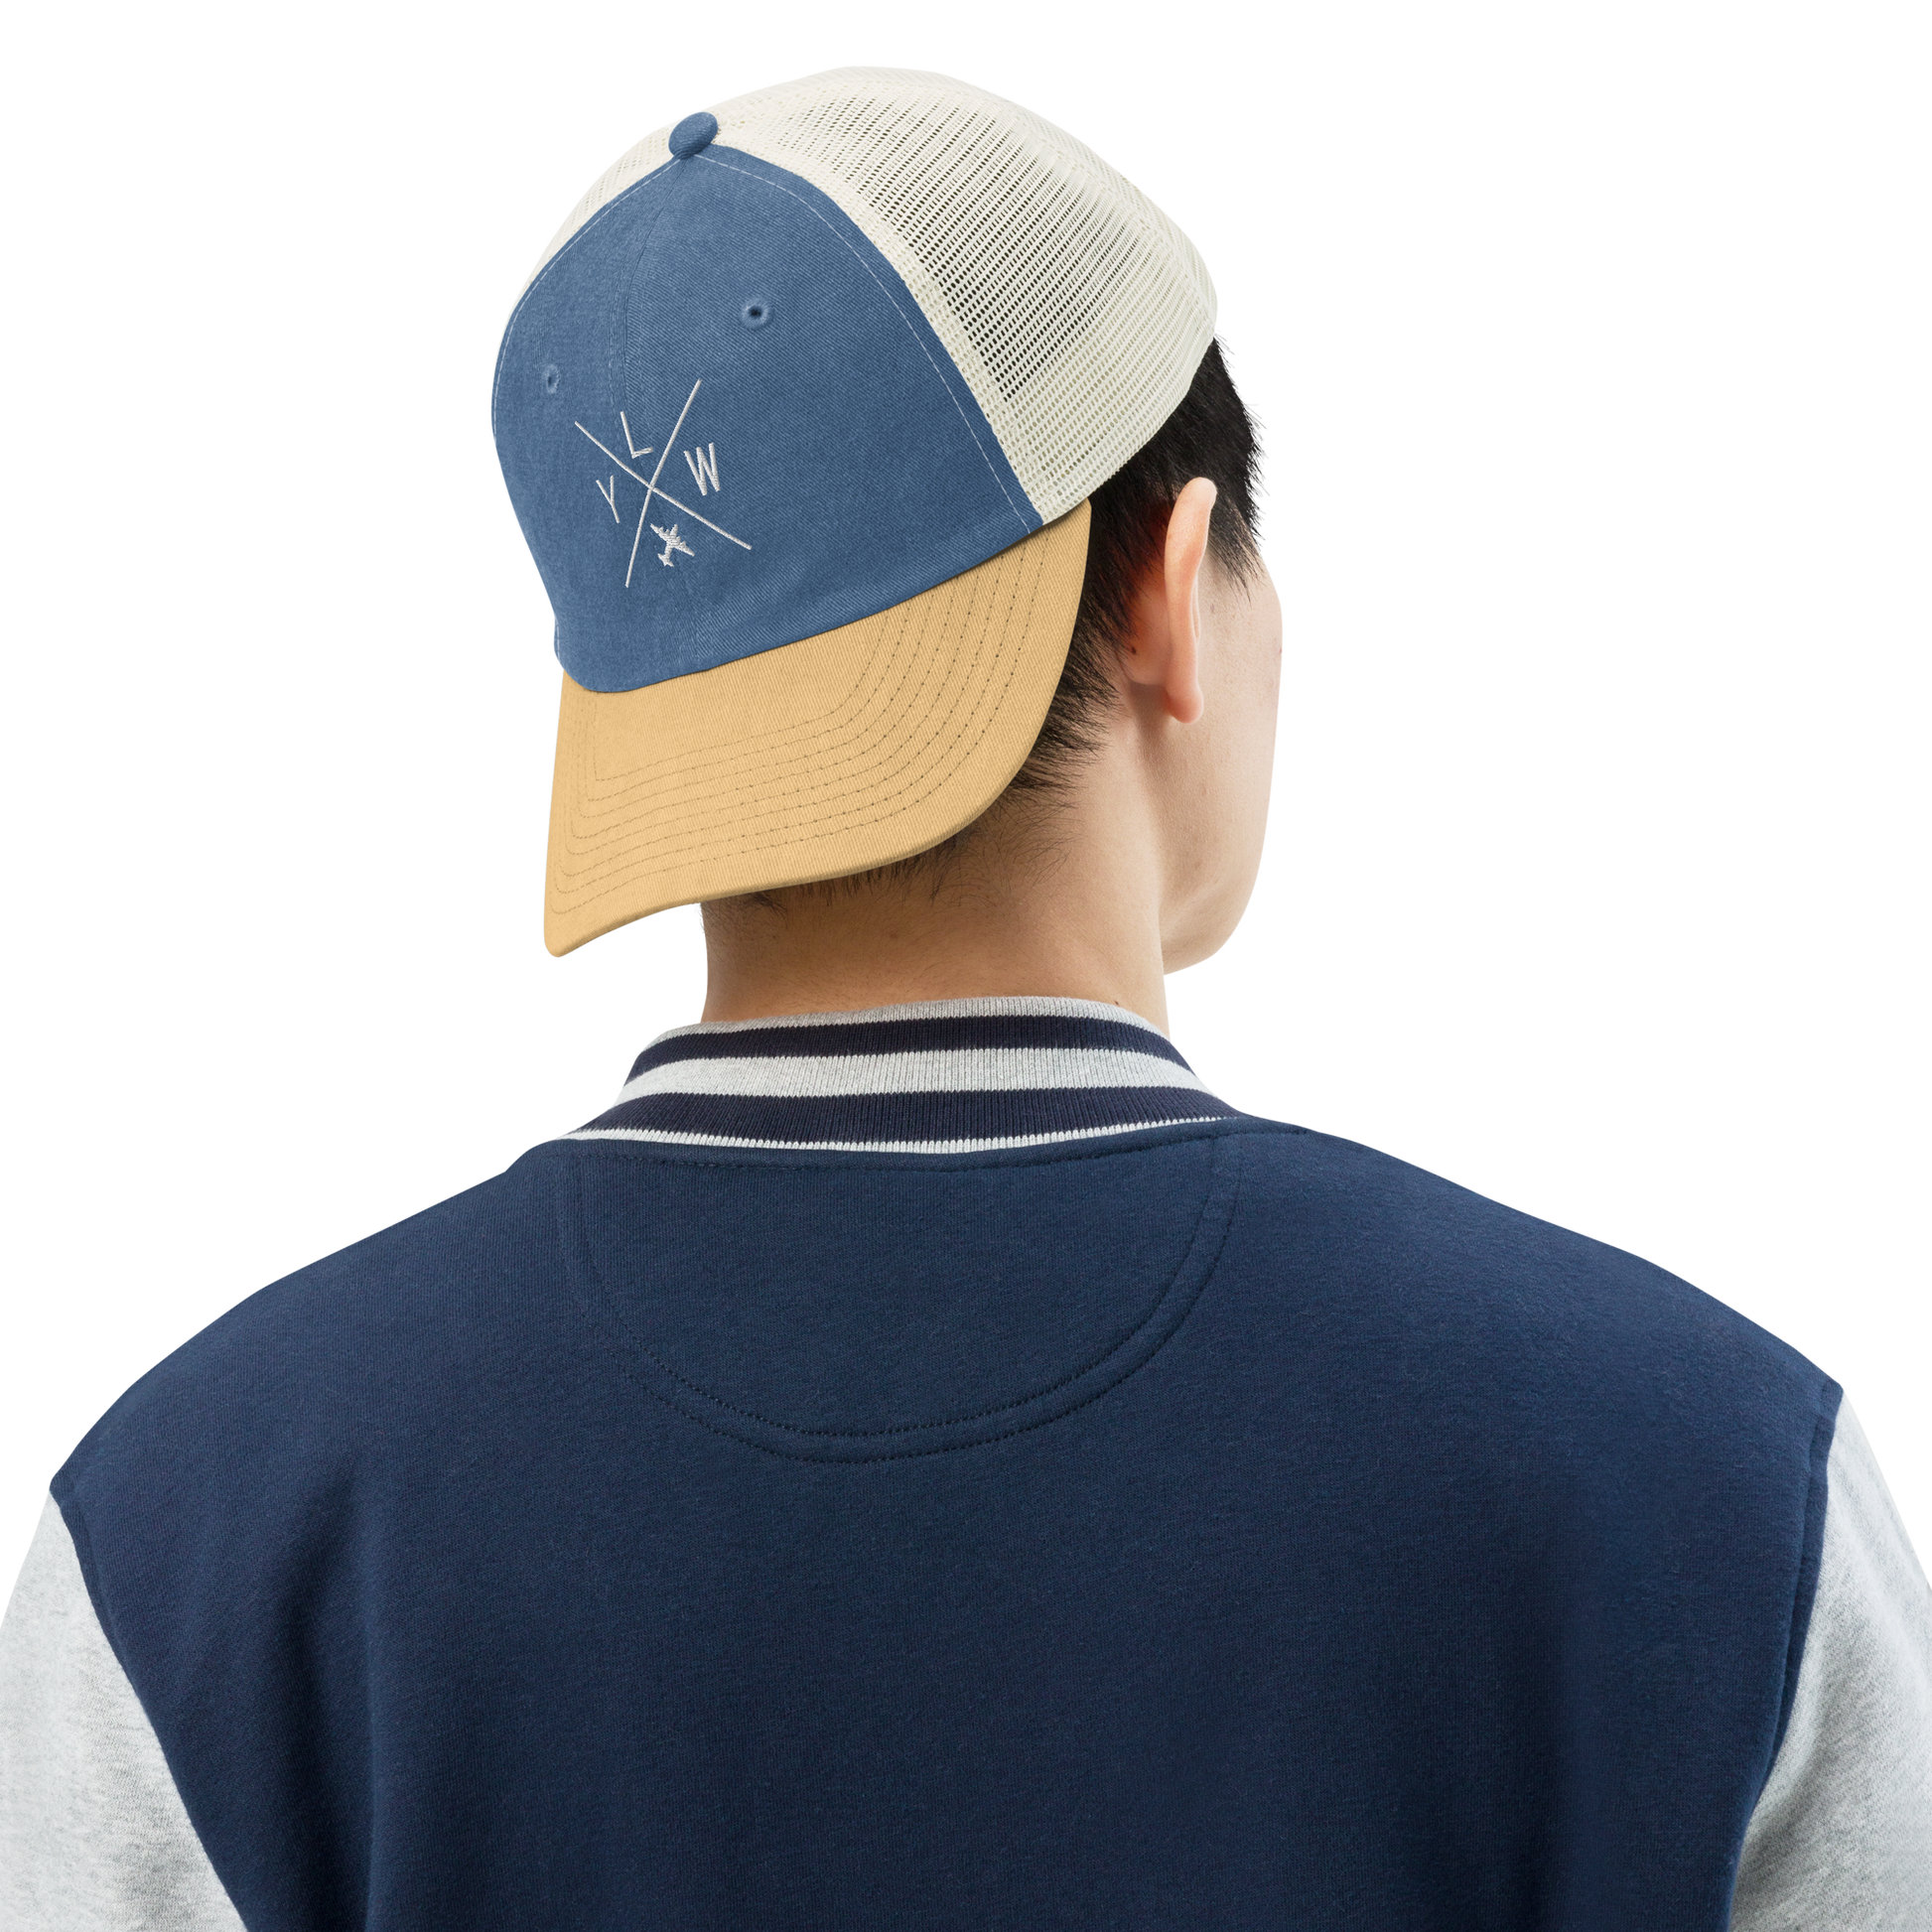 YHM Designs - YLW Kelowna Pigment-Dyed Trucker Cap - Crossed-X Design with Airport Code and Vintage Propliner - White Embroidery - Image 04